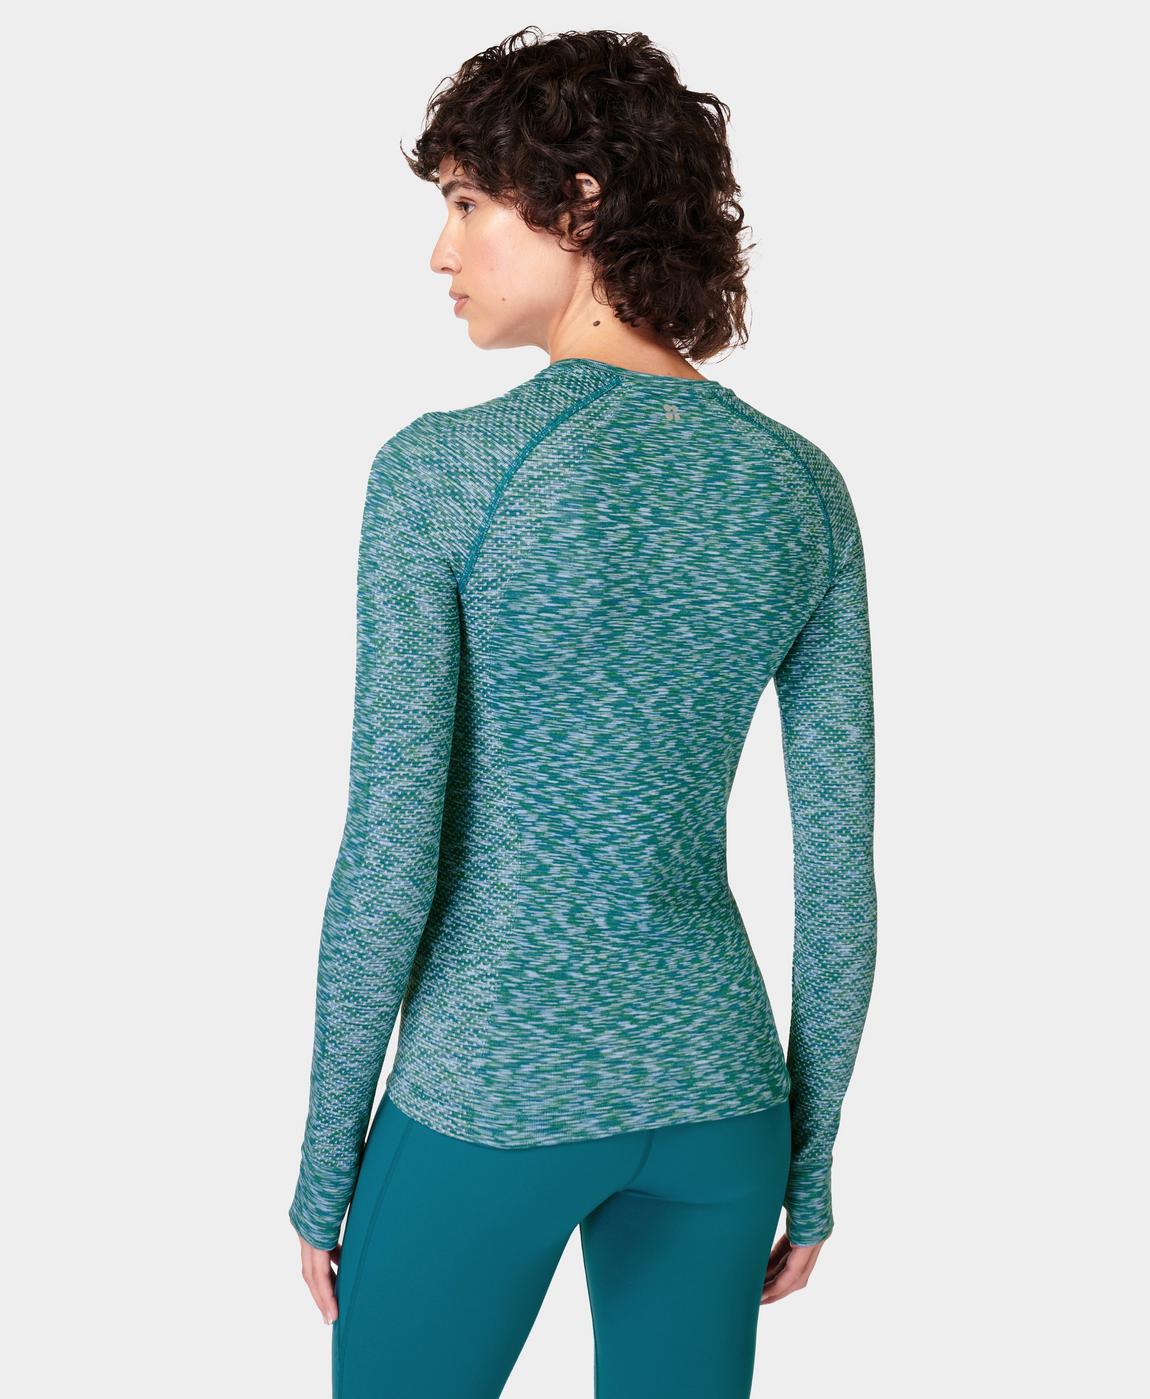 Athlete Winterweight Seamless Space Dye Top - Cabin Blue, Women's Base  Layers & Long Sleeve Tops